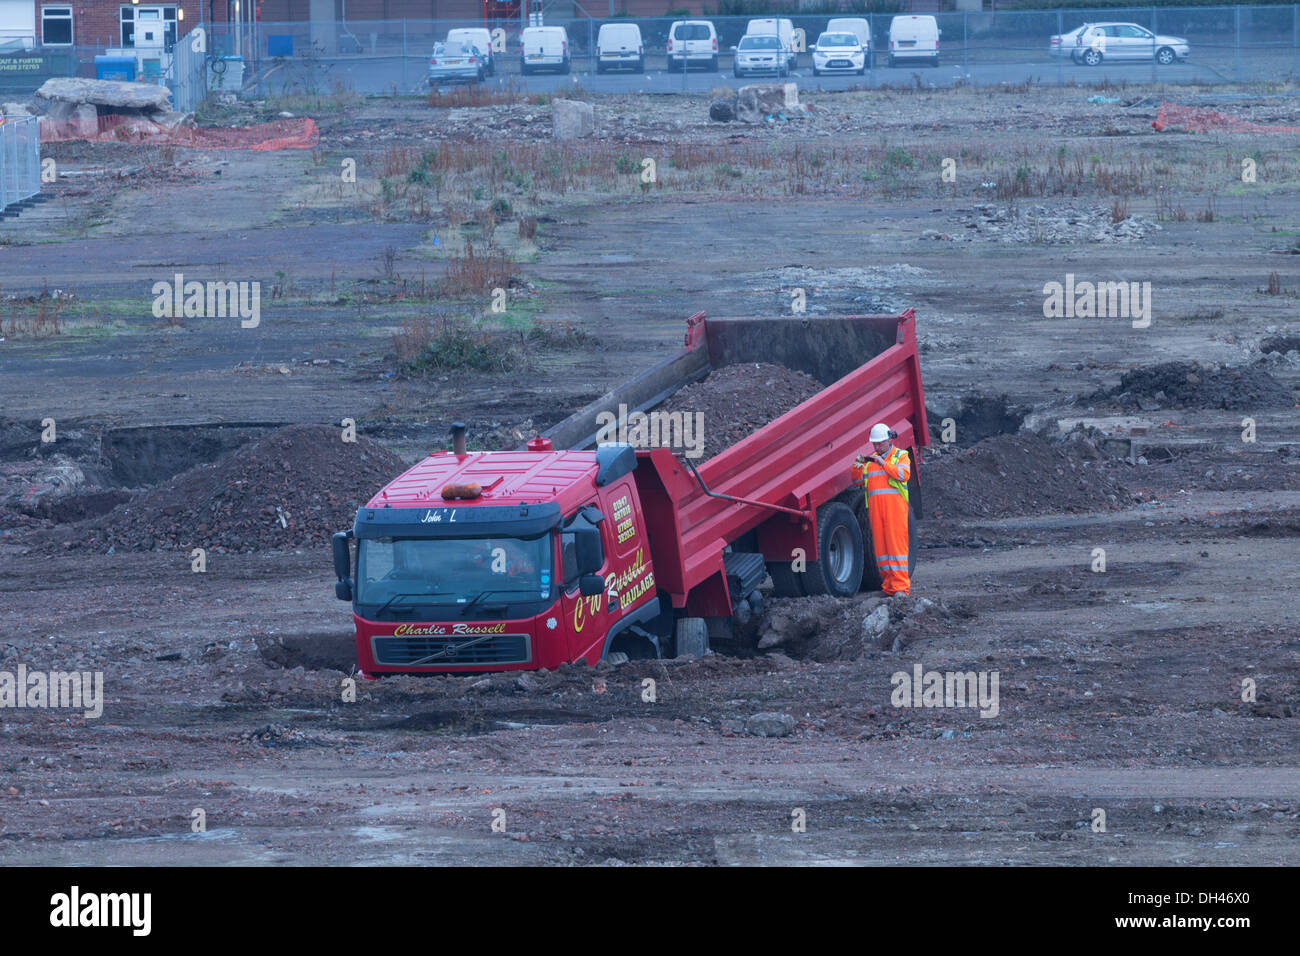 Lorry, truck stuck in sinkhole on demolition/ building site. UK Stock Photo